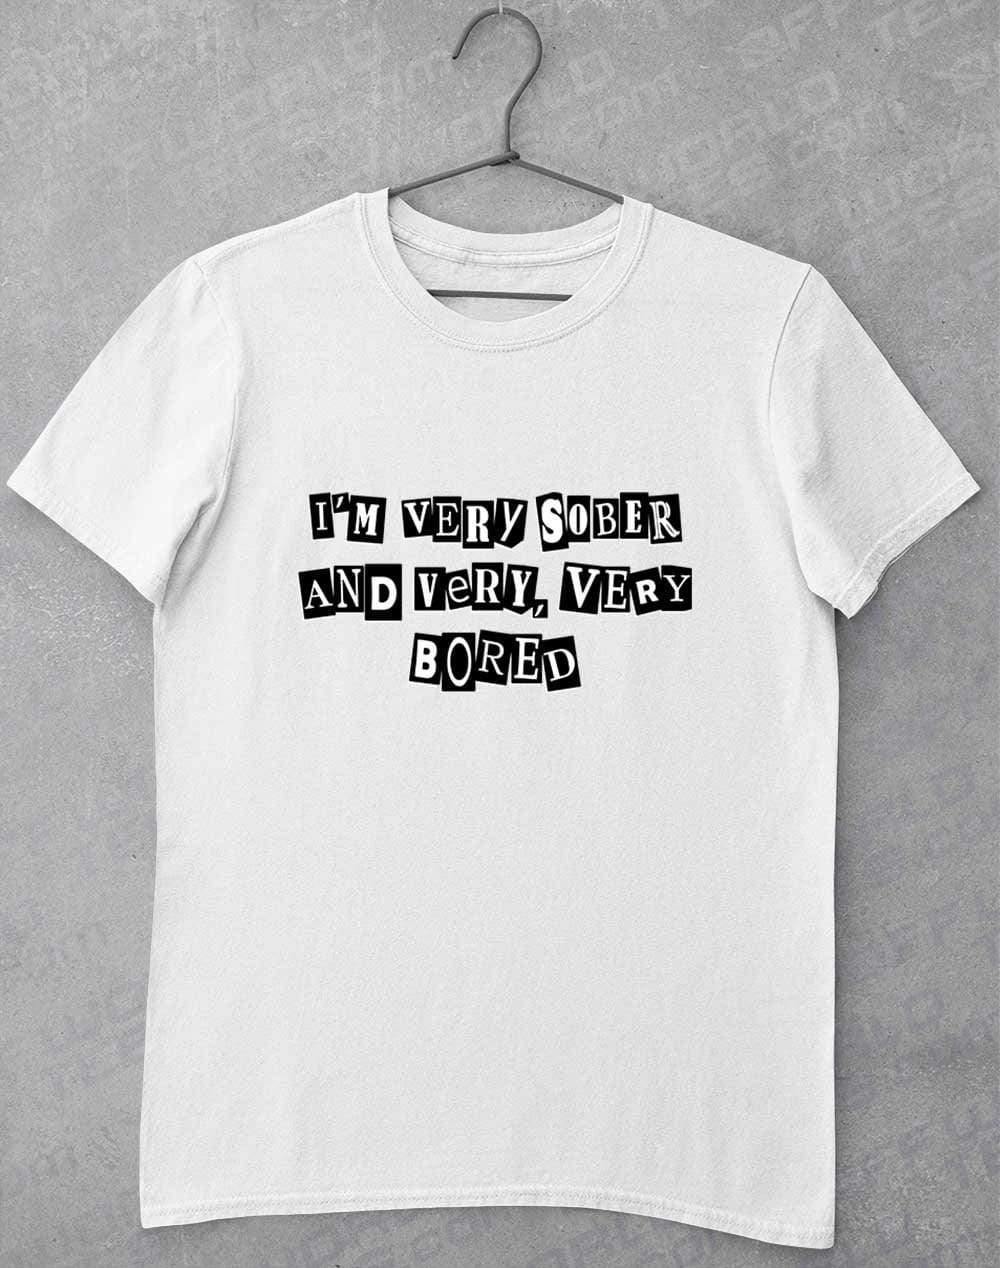 I'm Very Sober and Very Very Bored T-Shirt S / White  - Off World Tees